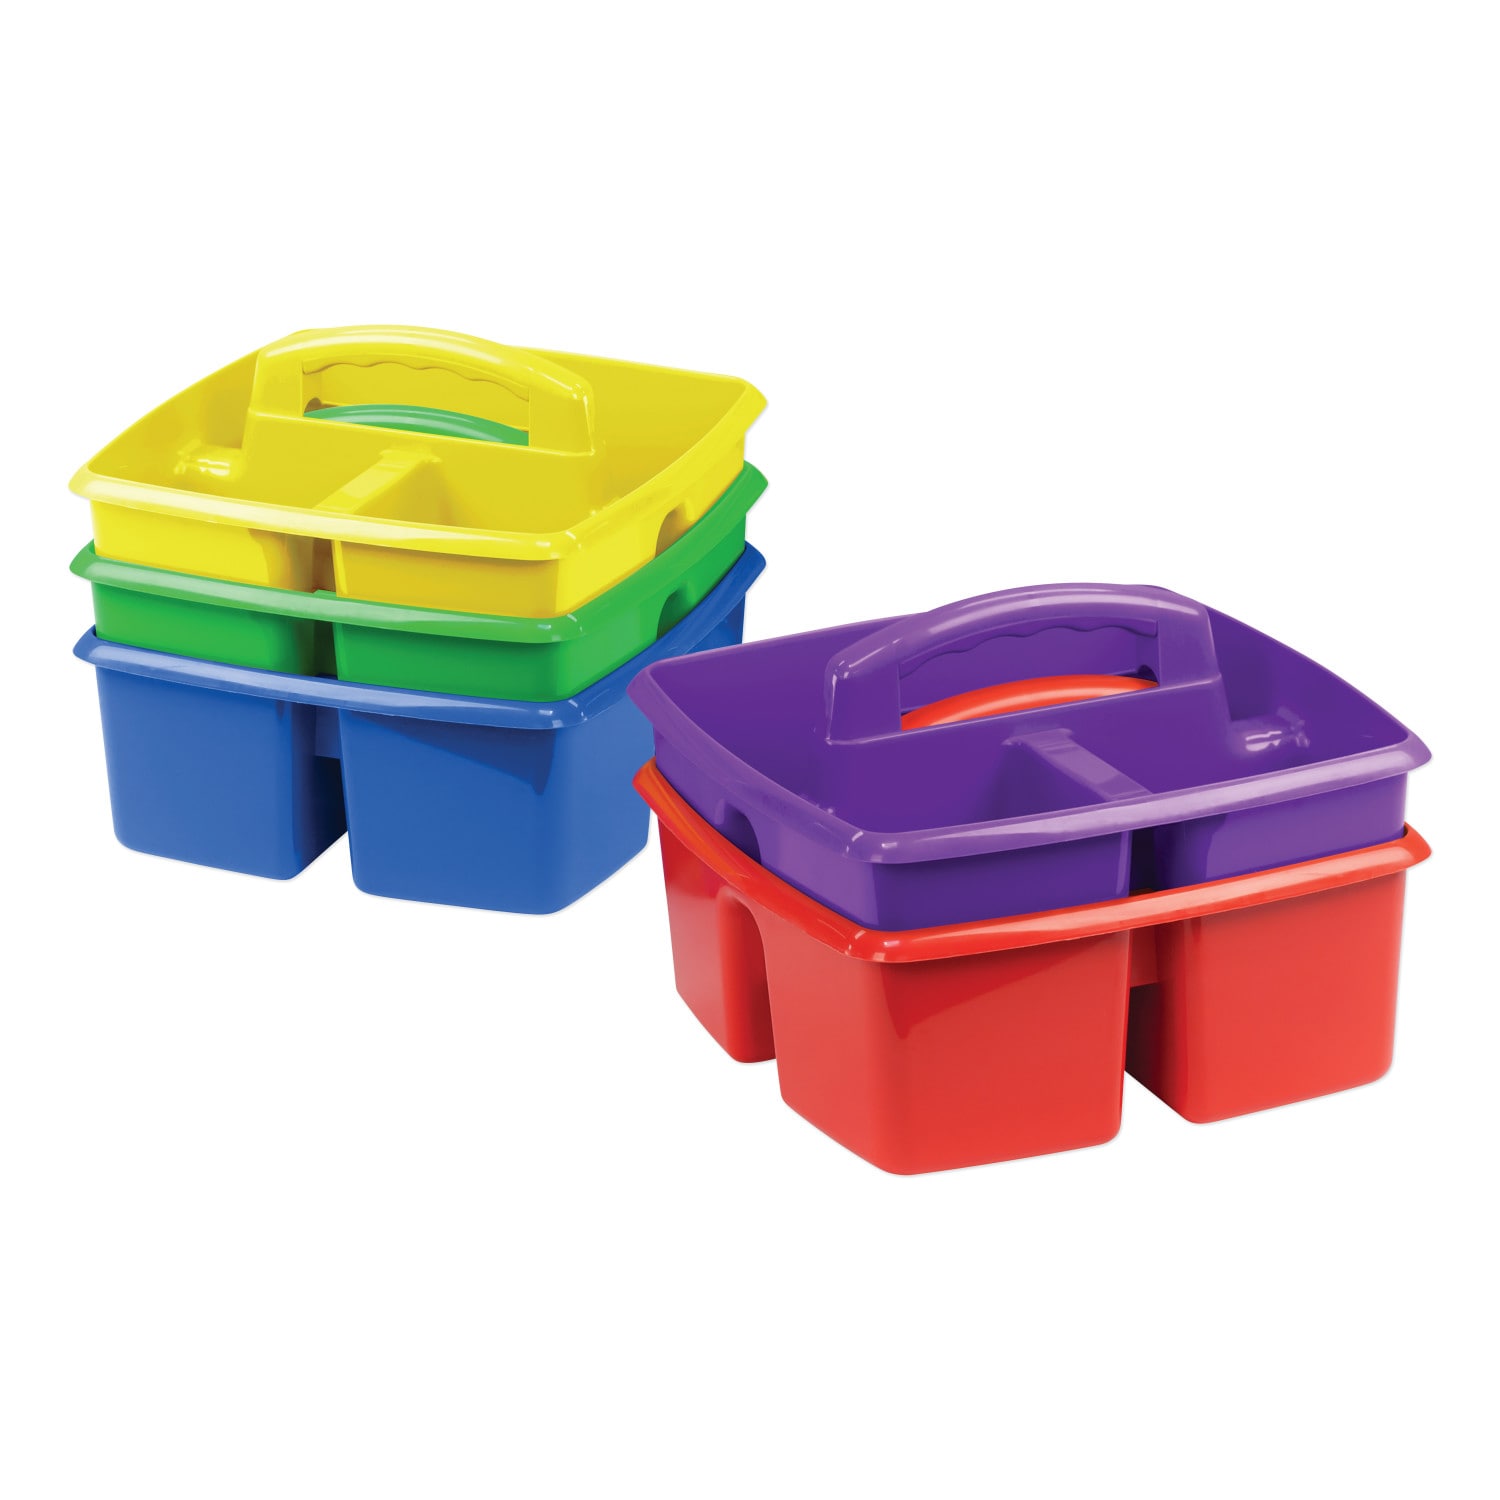 Basicwise 4.5-in W x 3-in H x 8-in D Multicolor Plastic Stackable